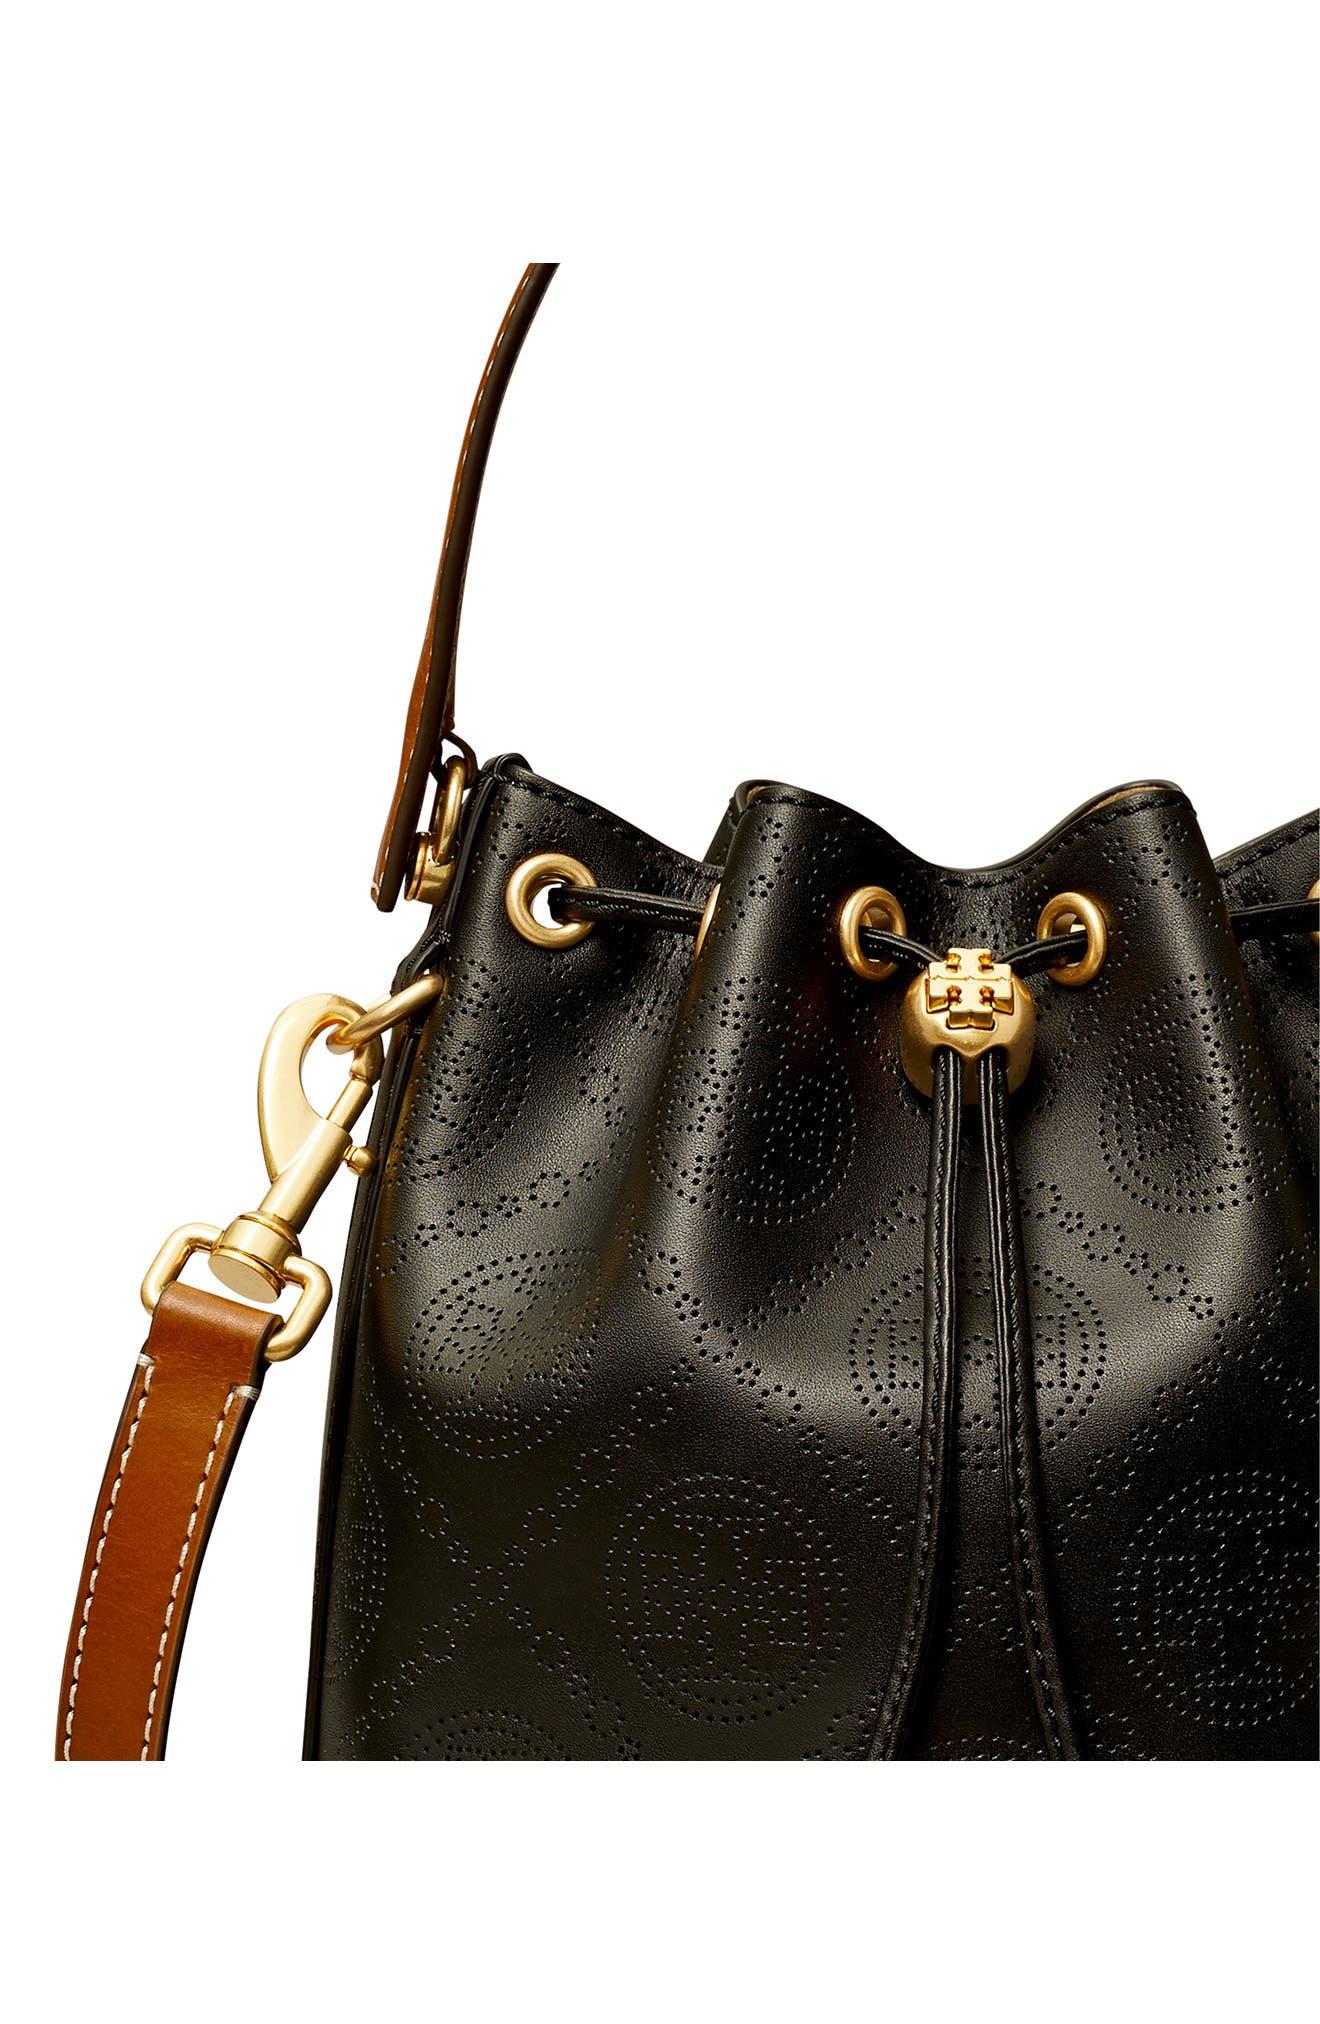 Tory Burch Mini T Monogram Perforated Leather Bucket Bag in Black